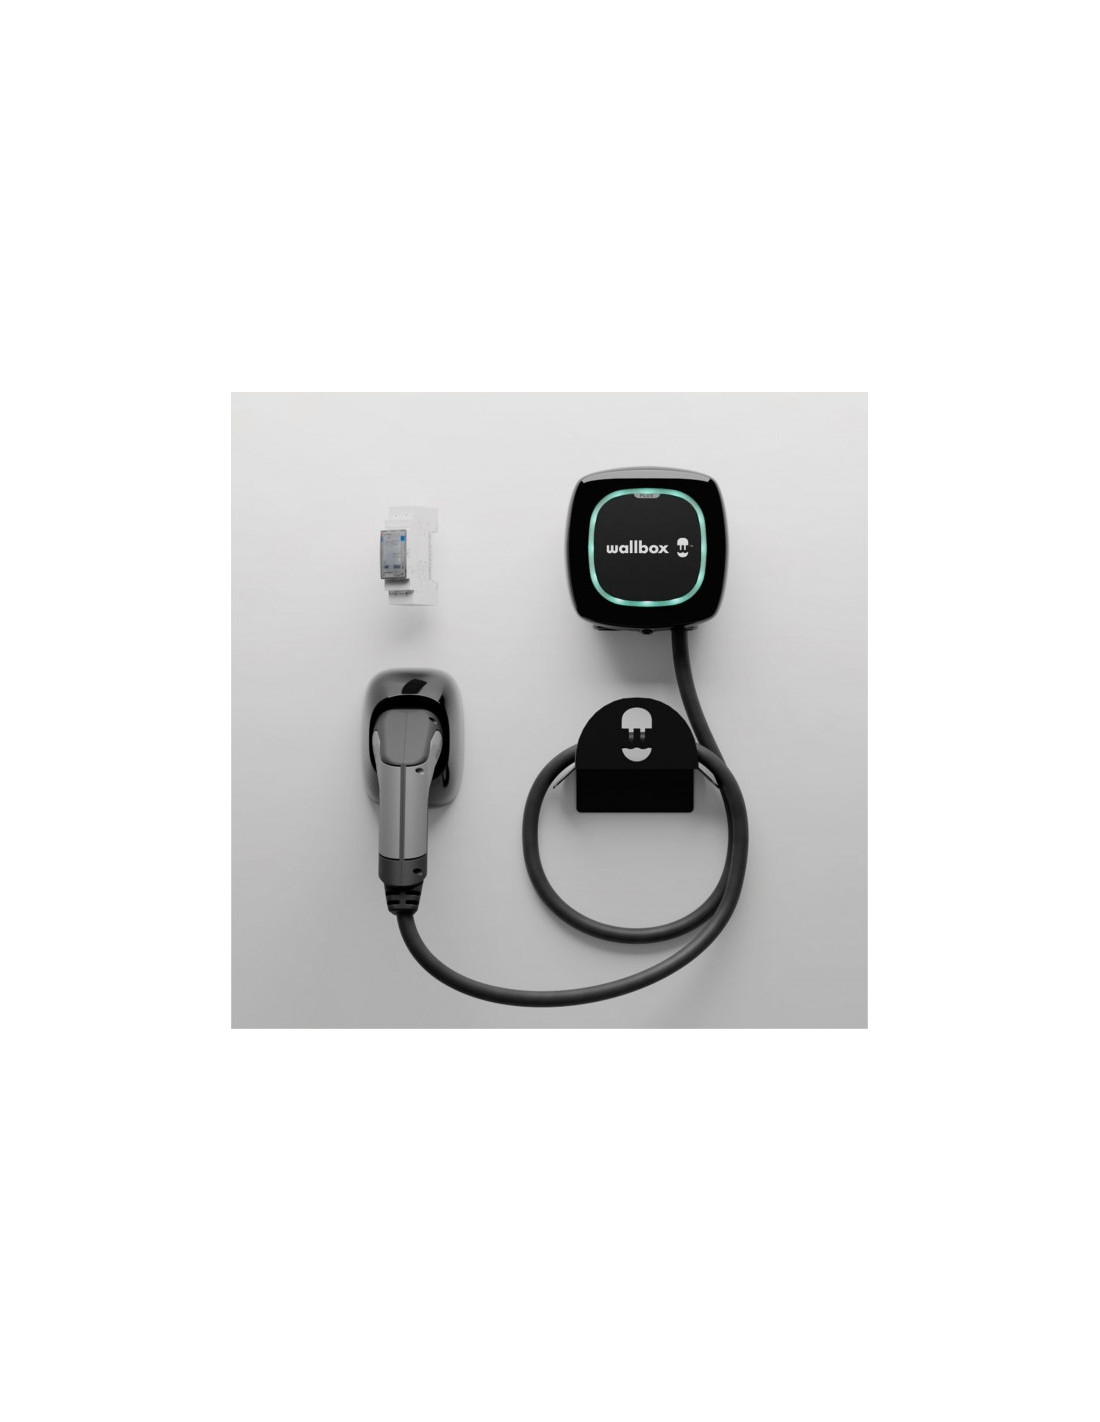 Wallbox Kit Pulsar type holder 5m, 2, + Power + charger, EV Plus Powerboost Cable 22kW